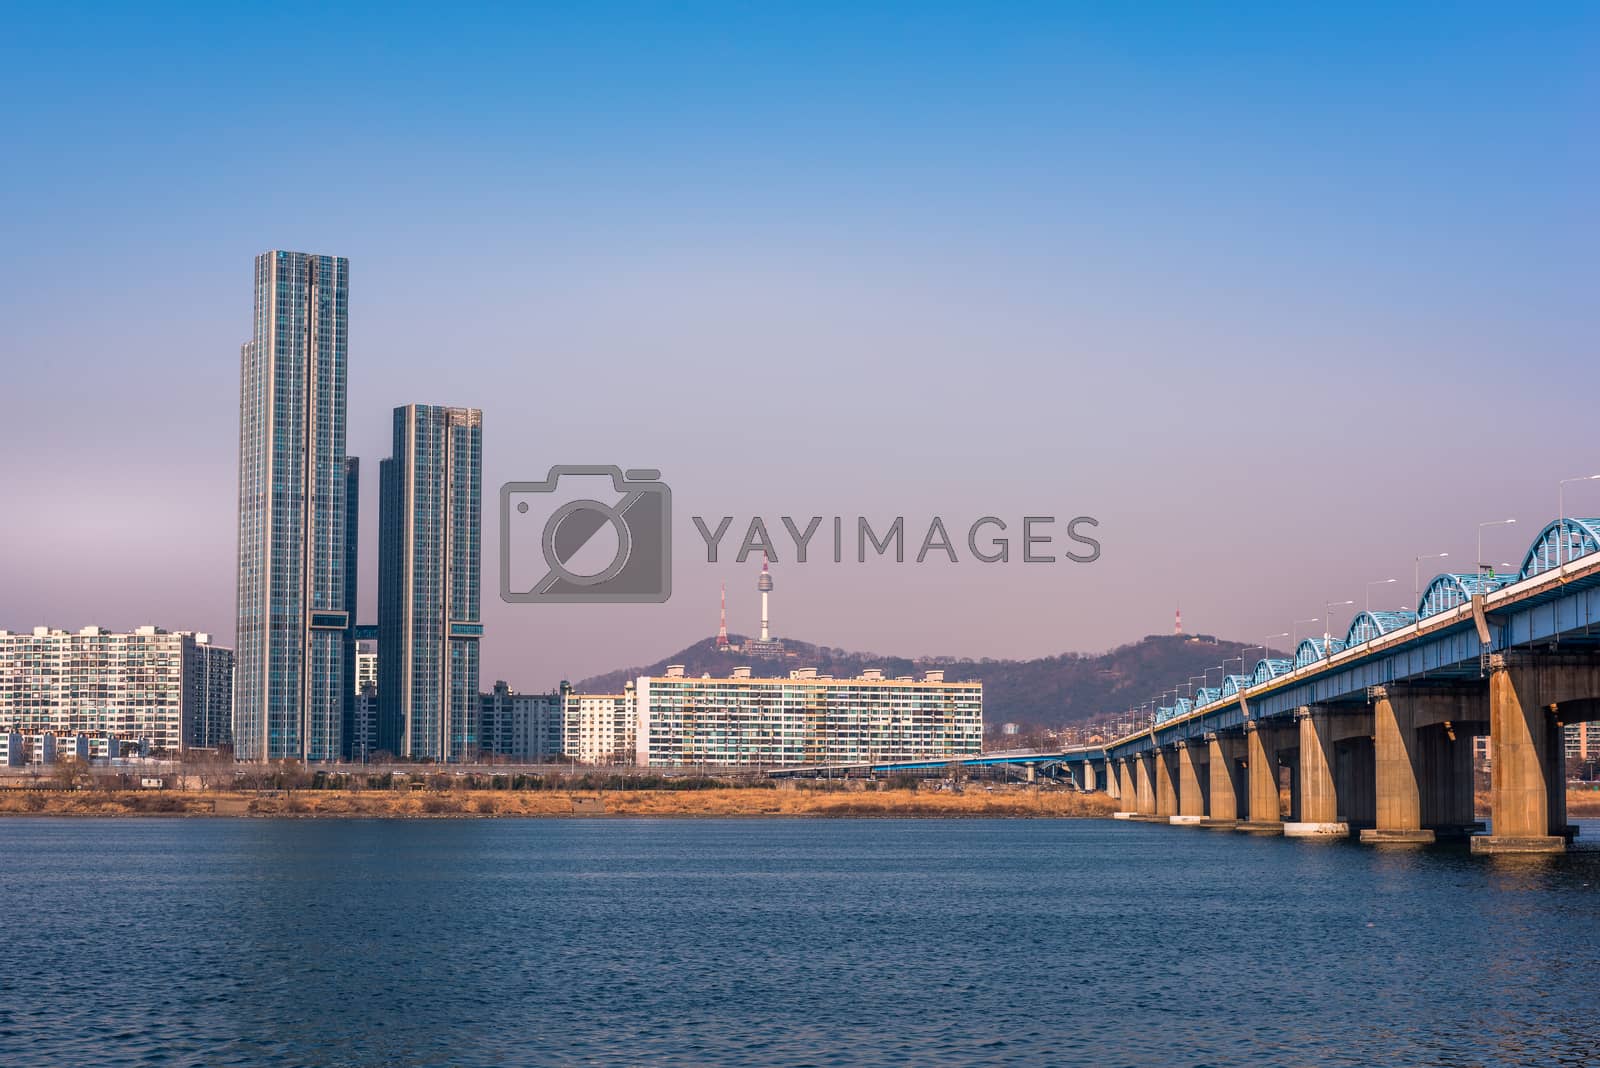 Royalty free image of Dongjak Bridge and Seoul tower at Han river  in Seoul, South Kor by cj_nattanai